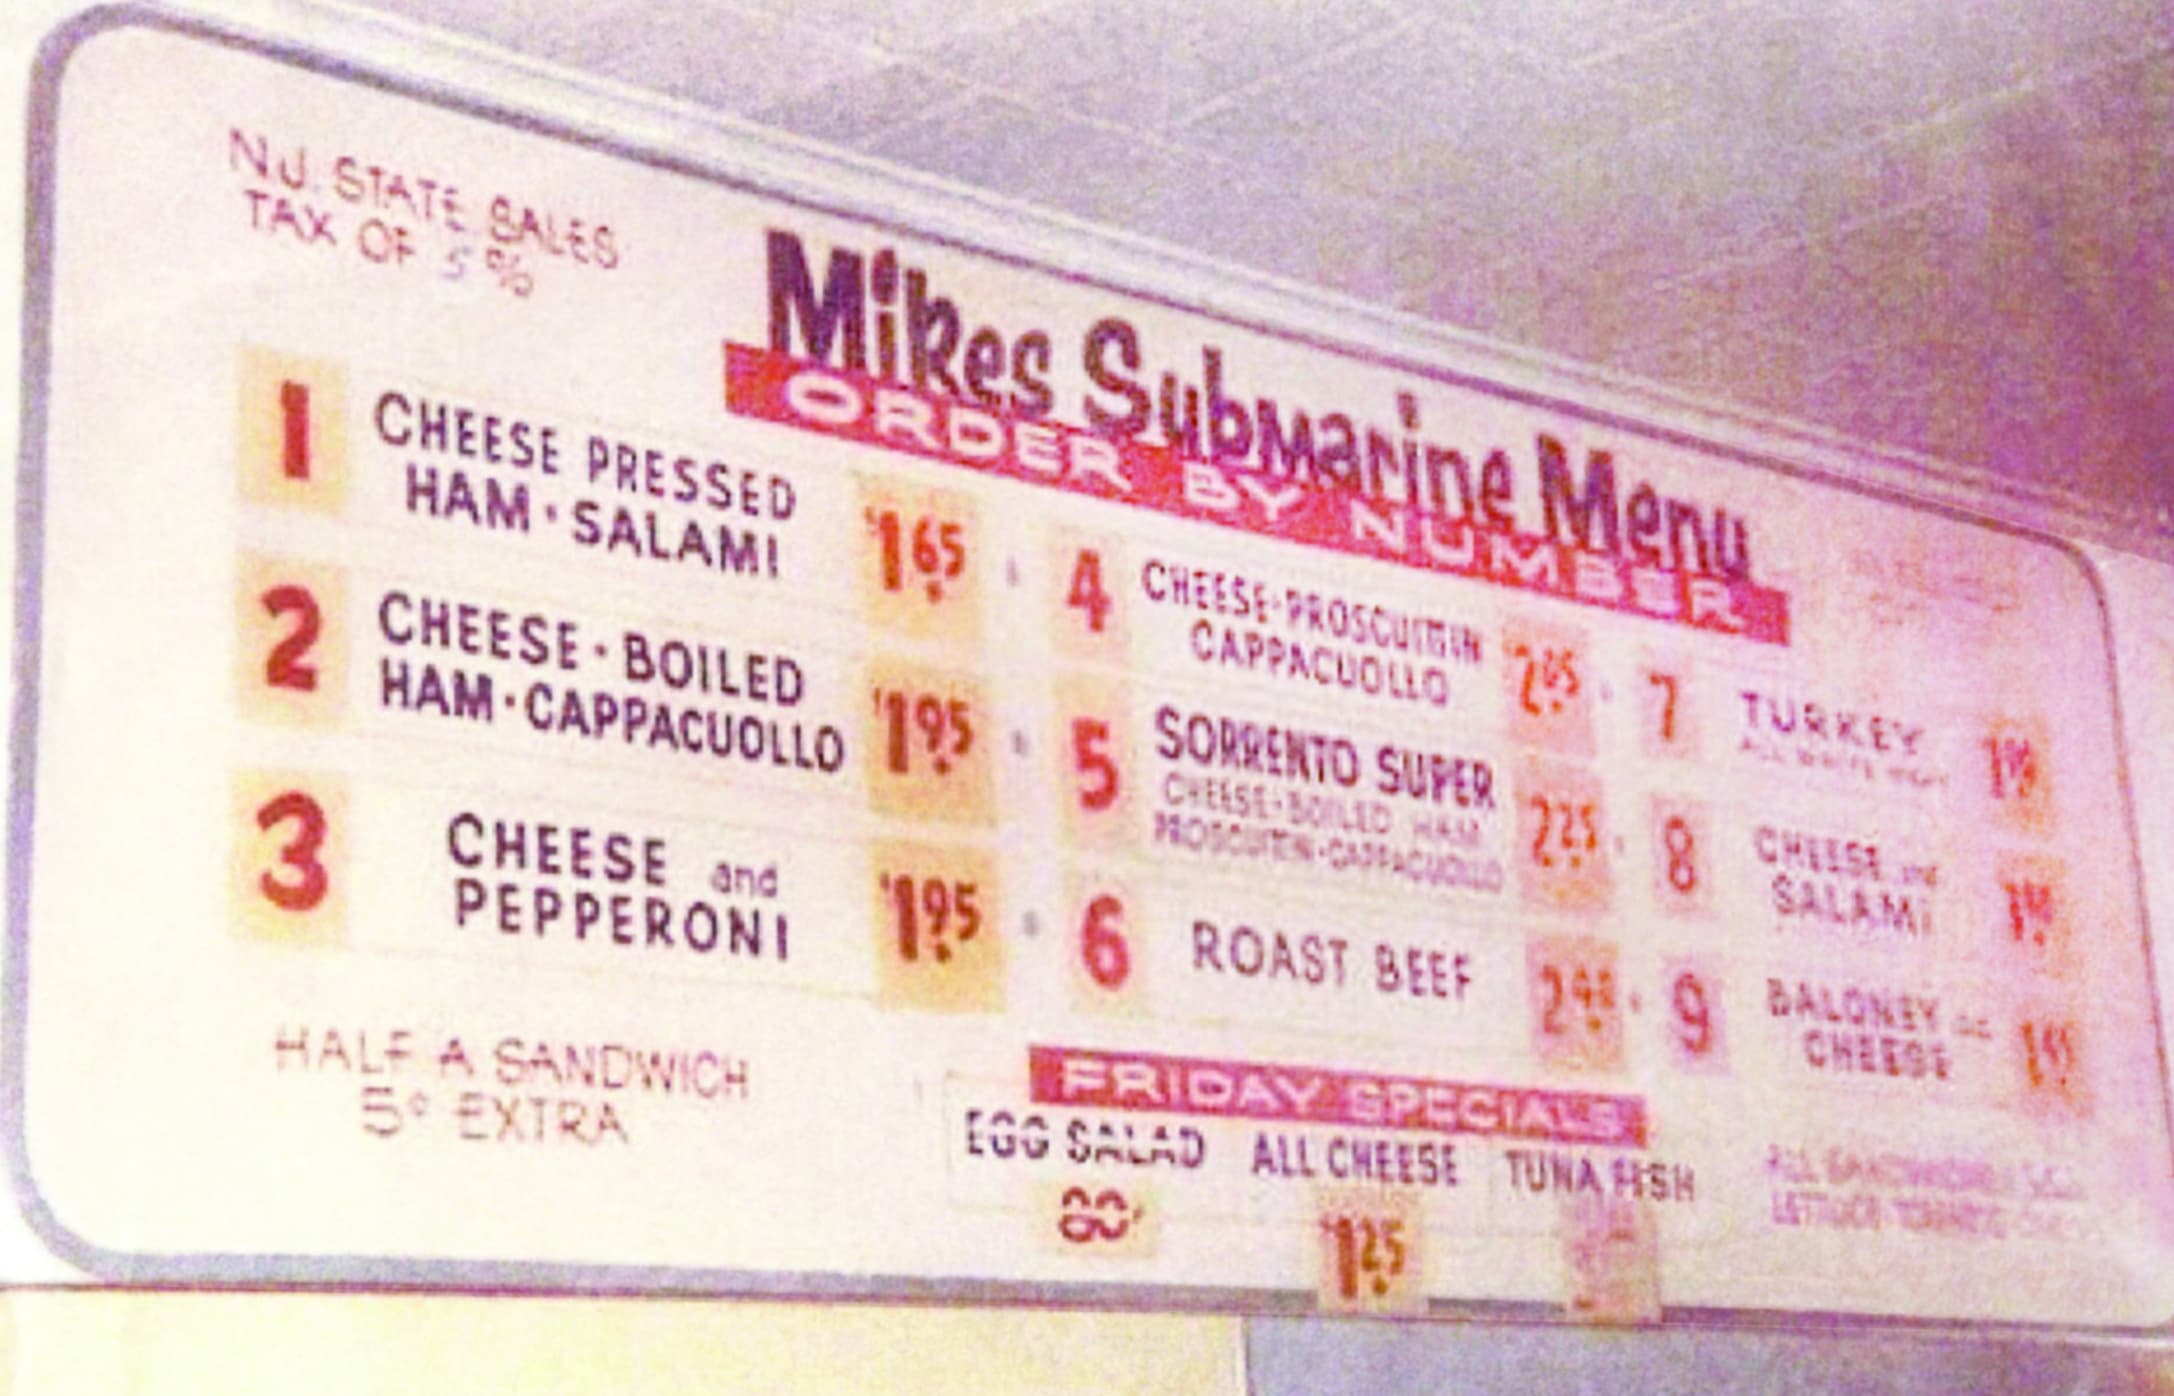 ticket - Nu State Sales Tax Of 5% Mikes Submarine Meny Order B Cheese Pressed Umber Cheese Proscuitin Cappacuollo Sorrento Super 255 7 Turkey 19 1955 CheeseBoiled Had 2358 Ham Salami 165 4 2 Cheese Boiled Ham Cappacuollo 1955 3 and ProscutnCapacul Chepero